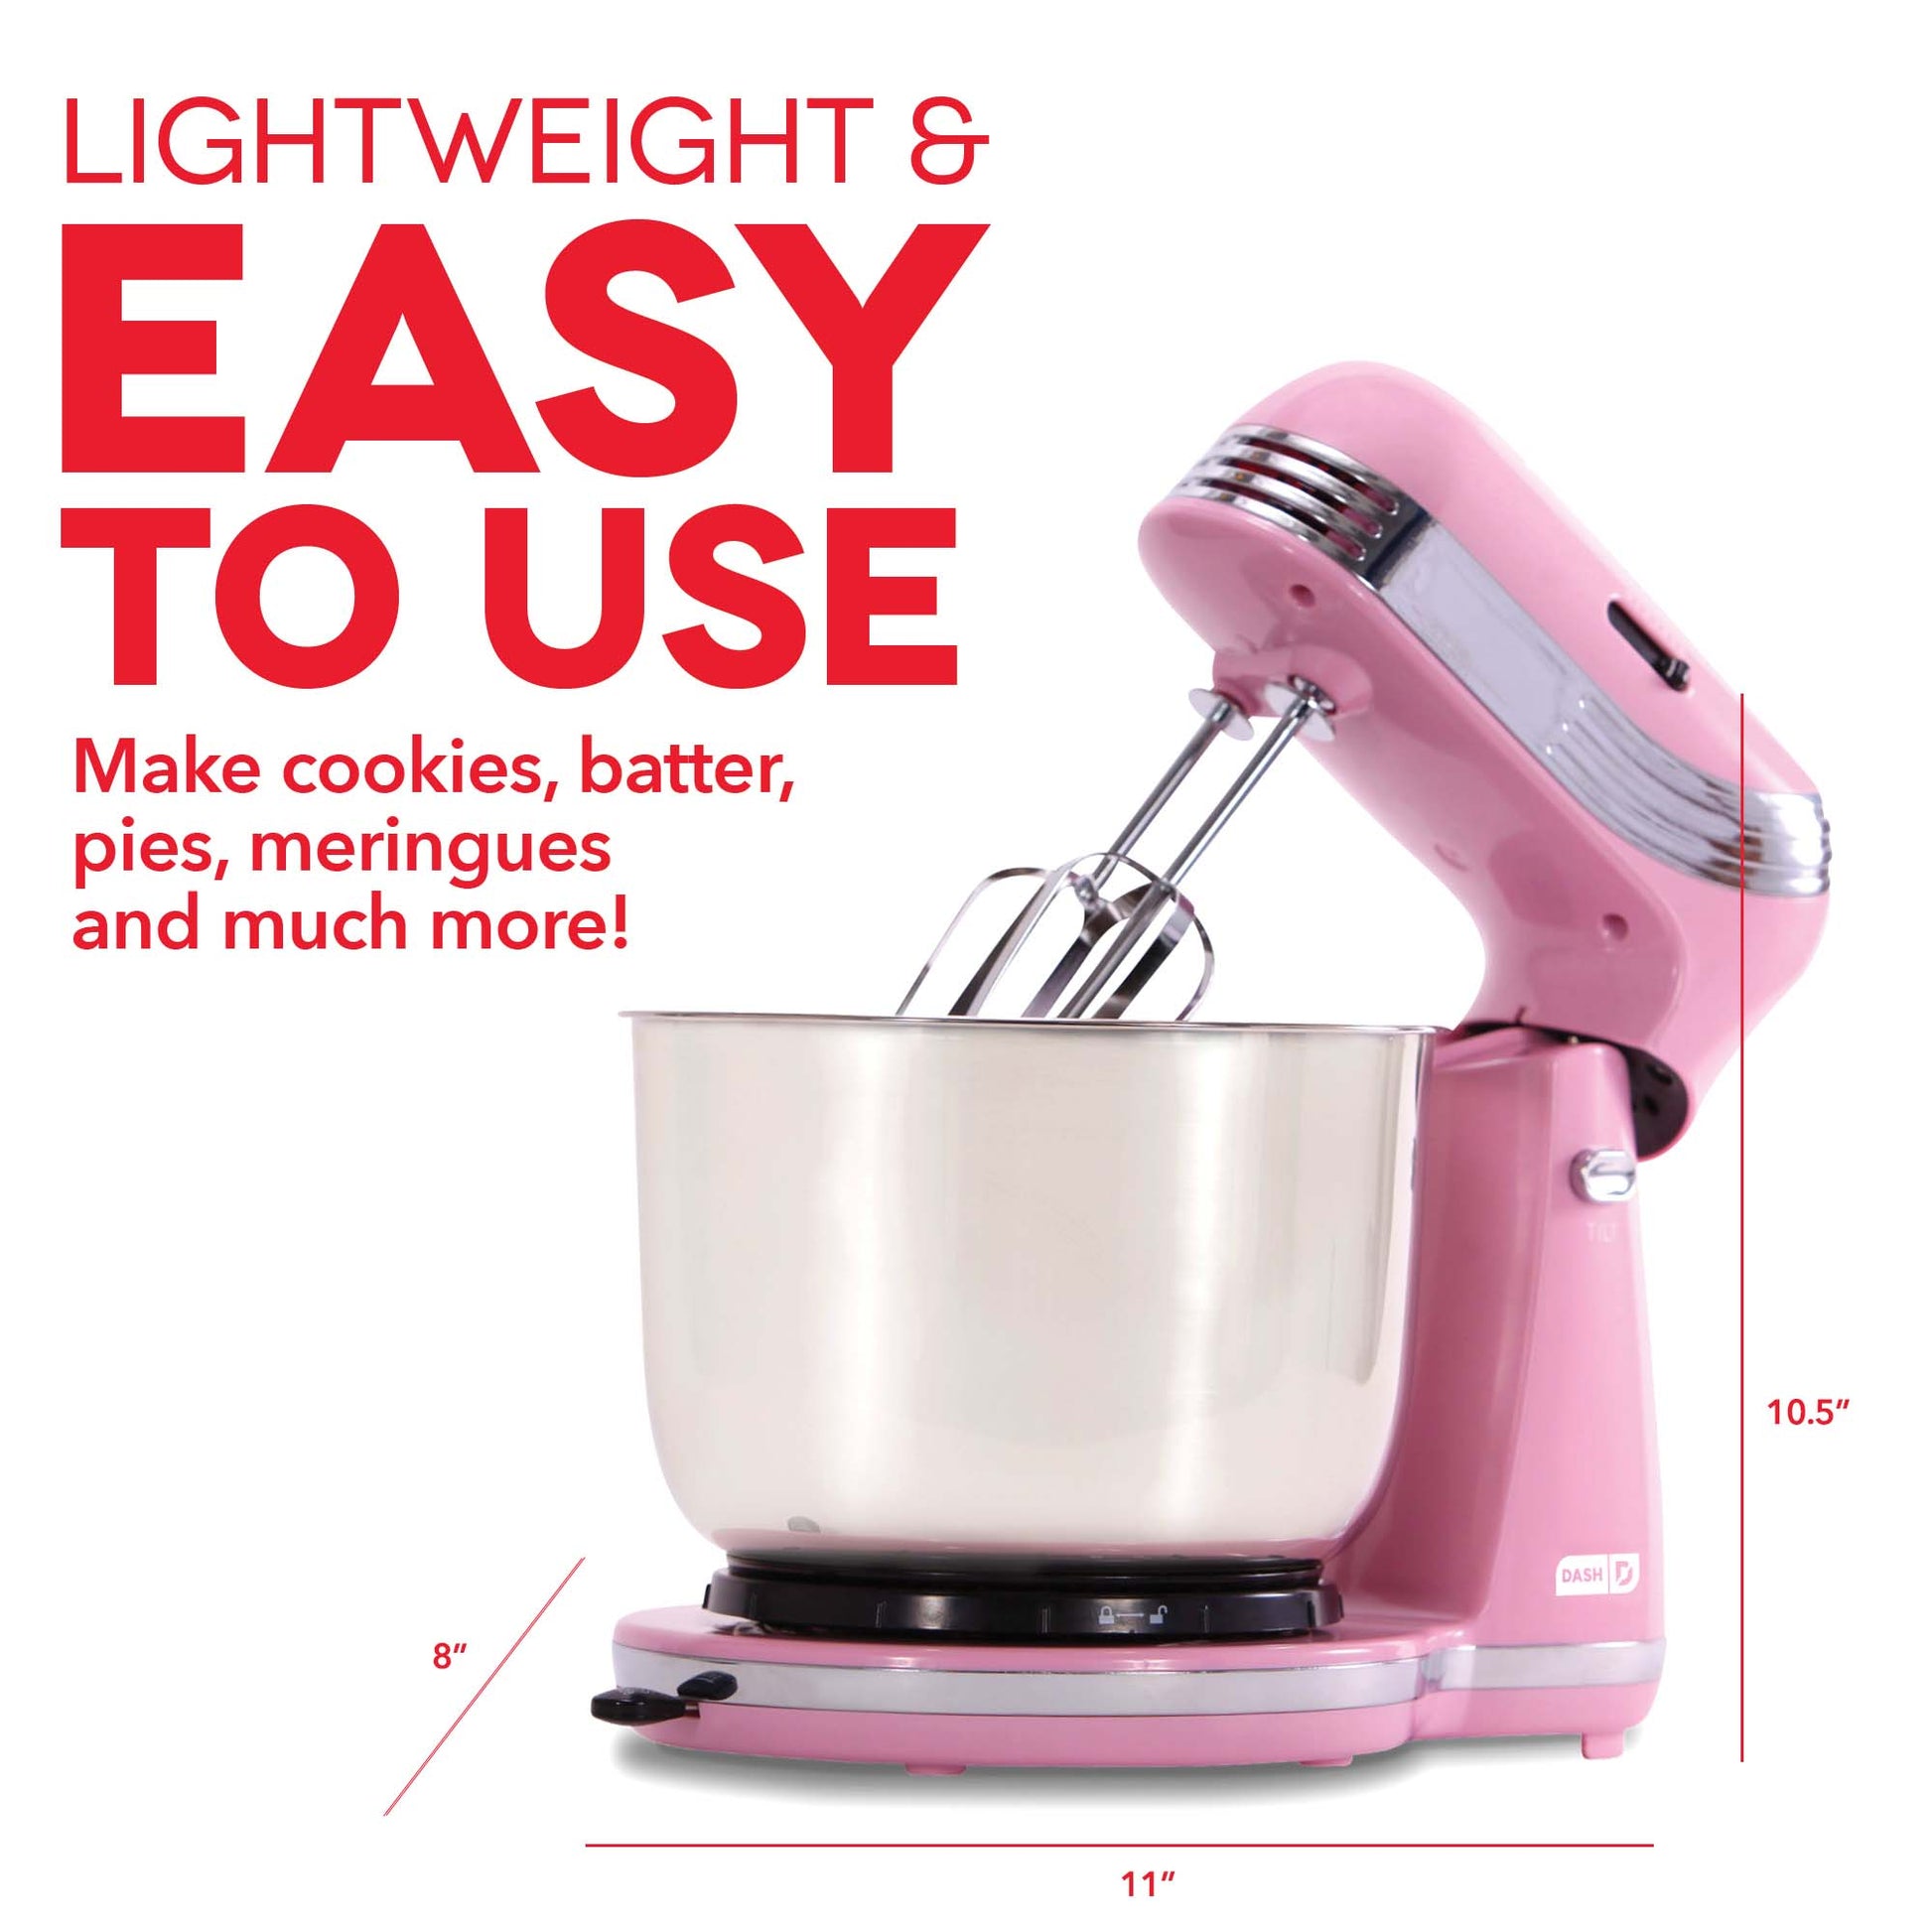 Dash Go Everyday Stand Mixer Unboxing 